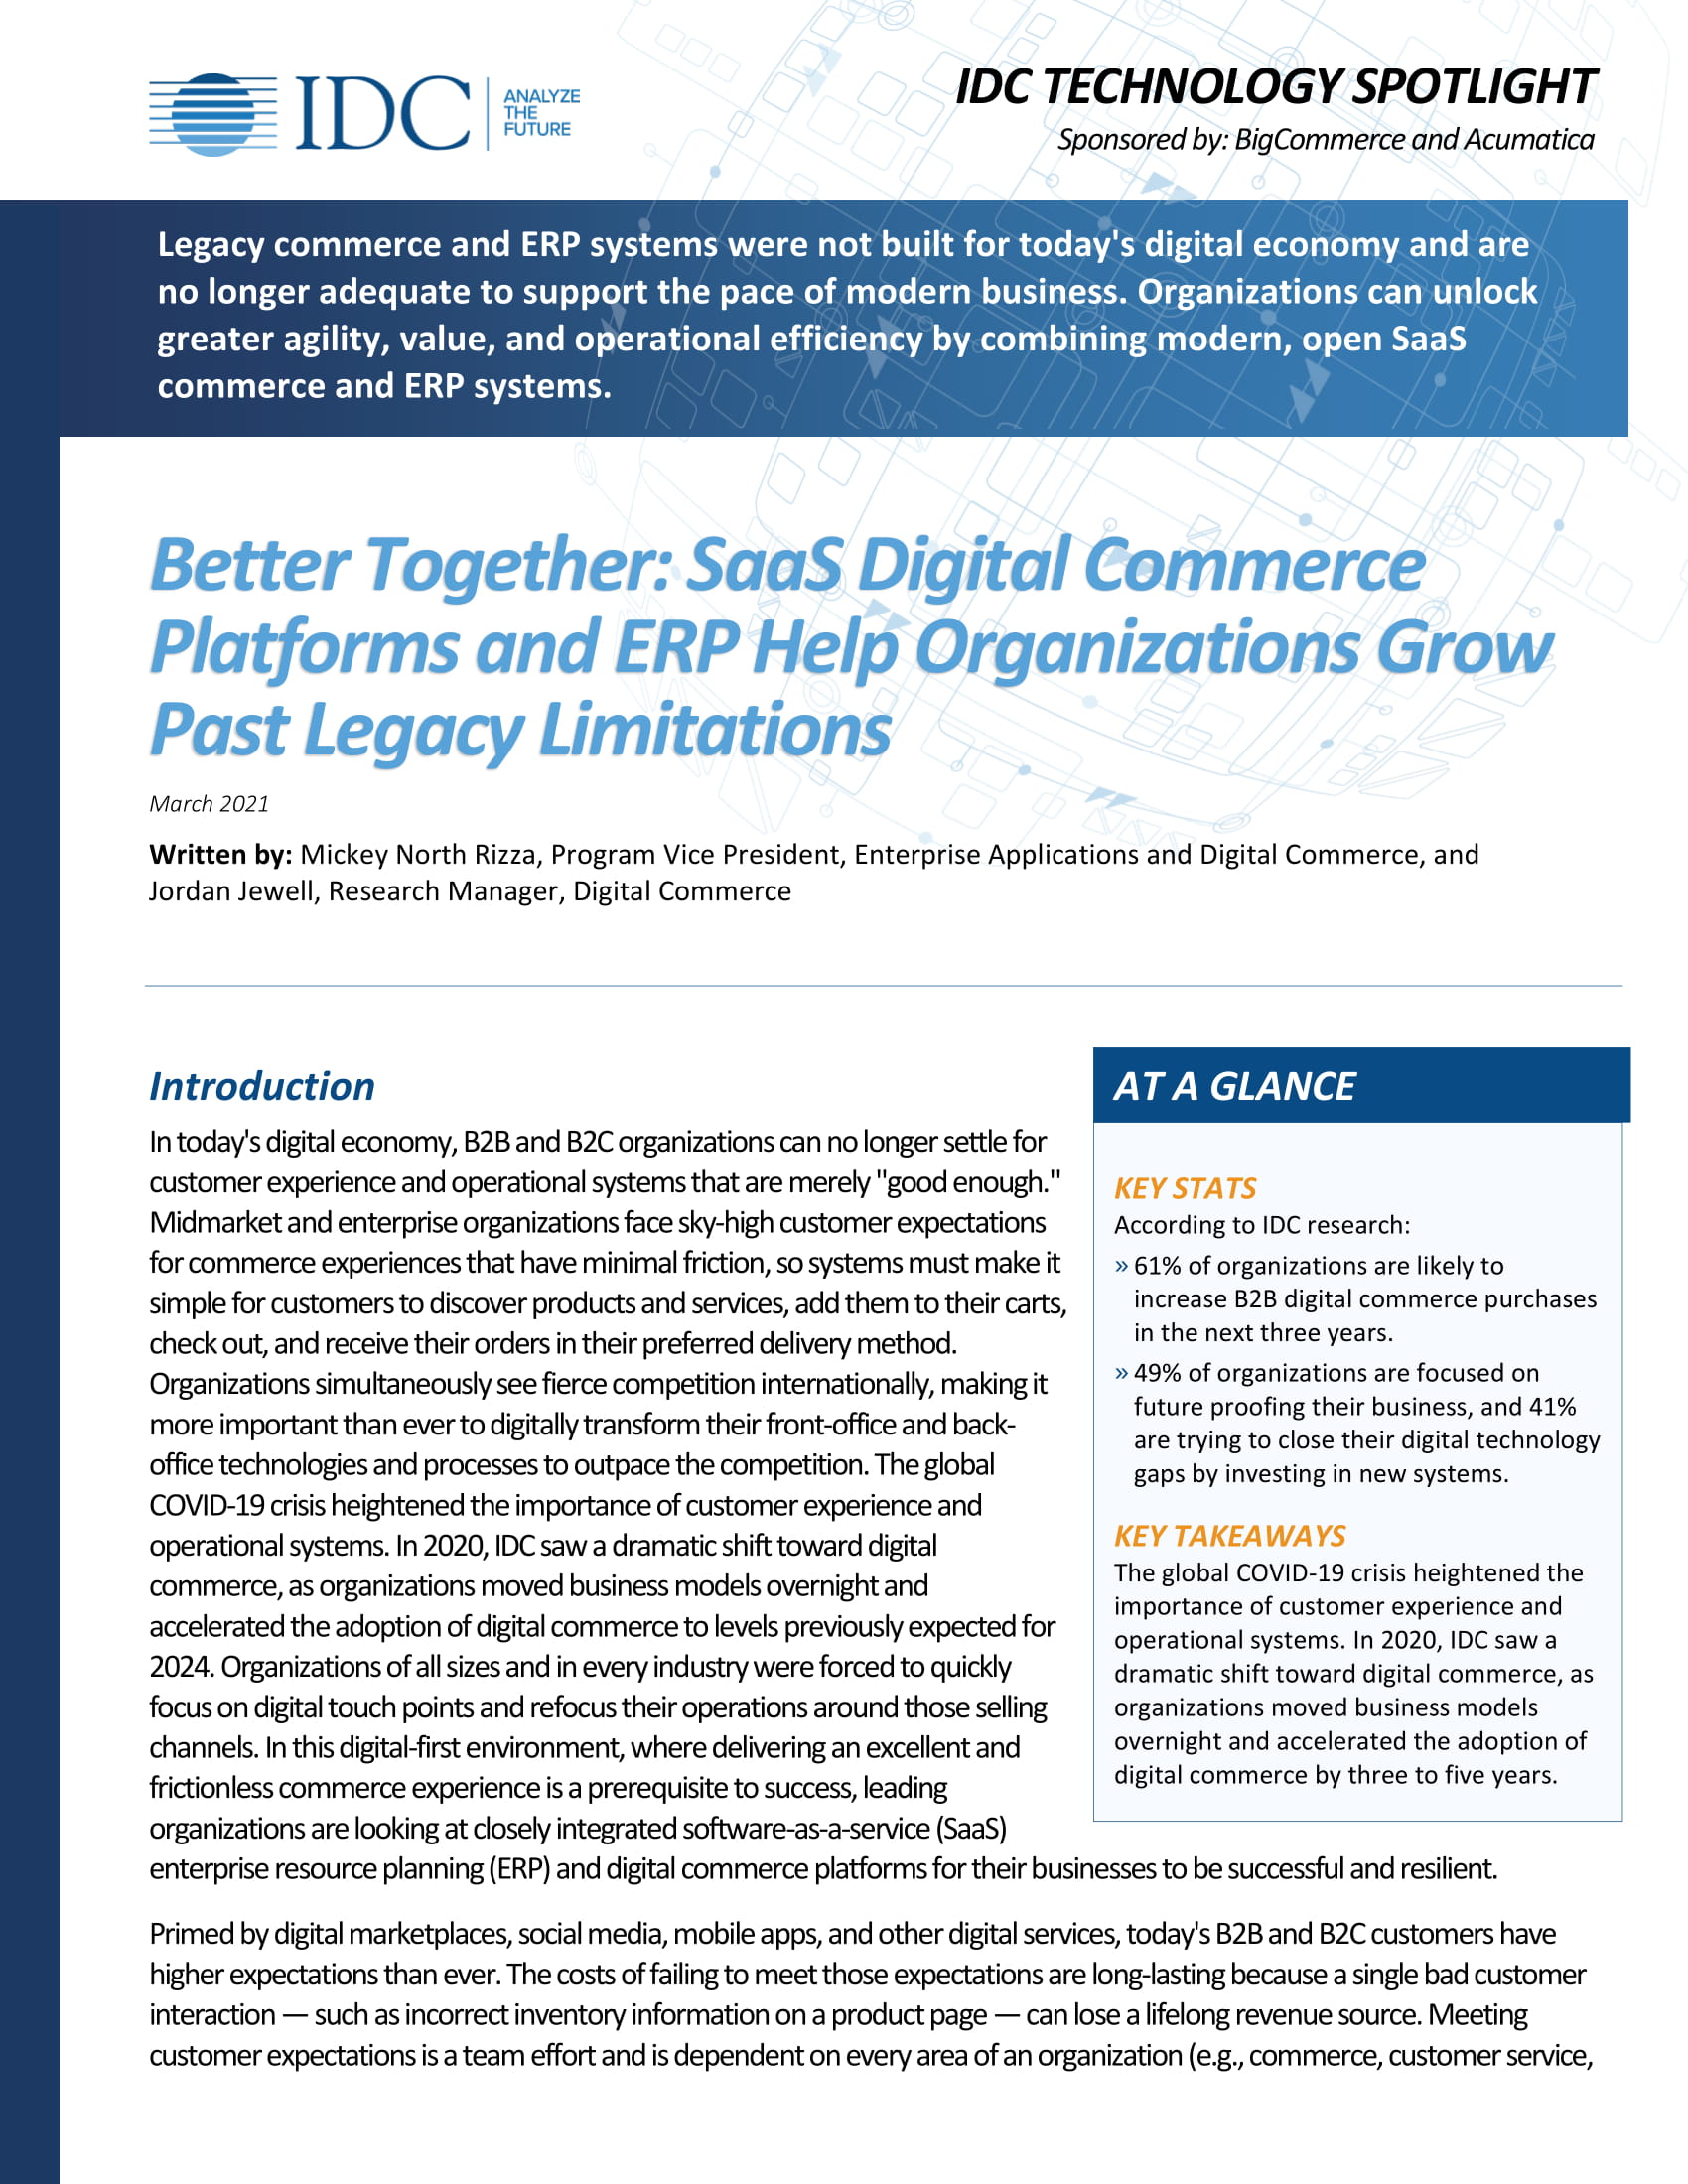 BigCommerce and Acumatica: A Unified Ecommerce & ERP Solution